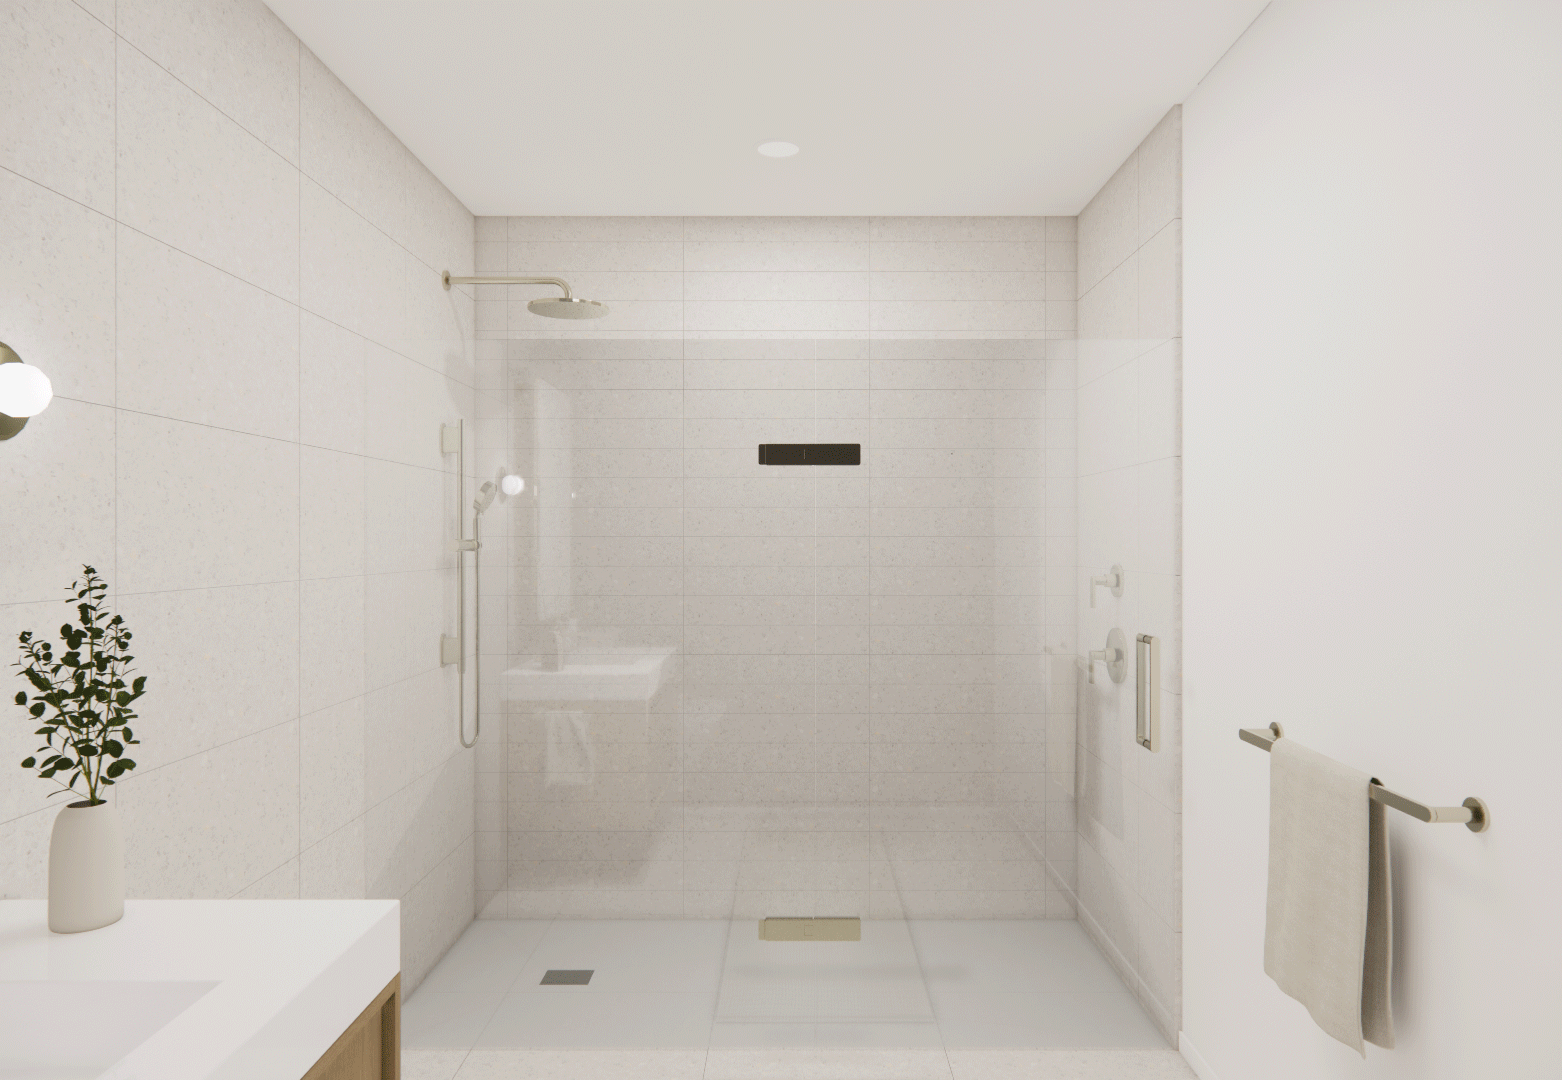 Gif shows an architectural rendering of a bathroom with regular shower, a bathroom with a steam shower, and a bathroom with heated floors.